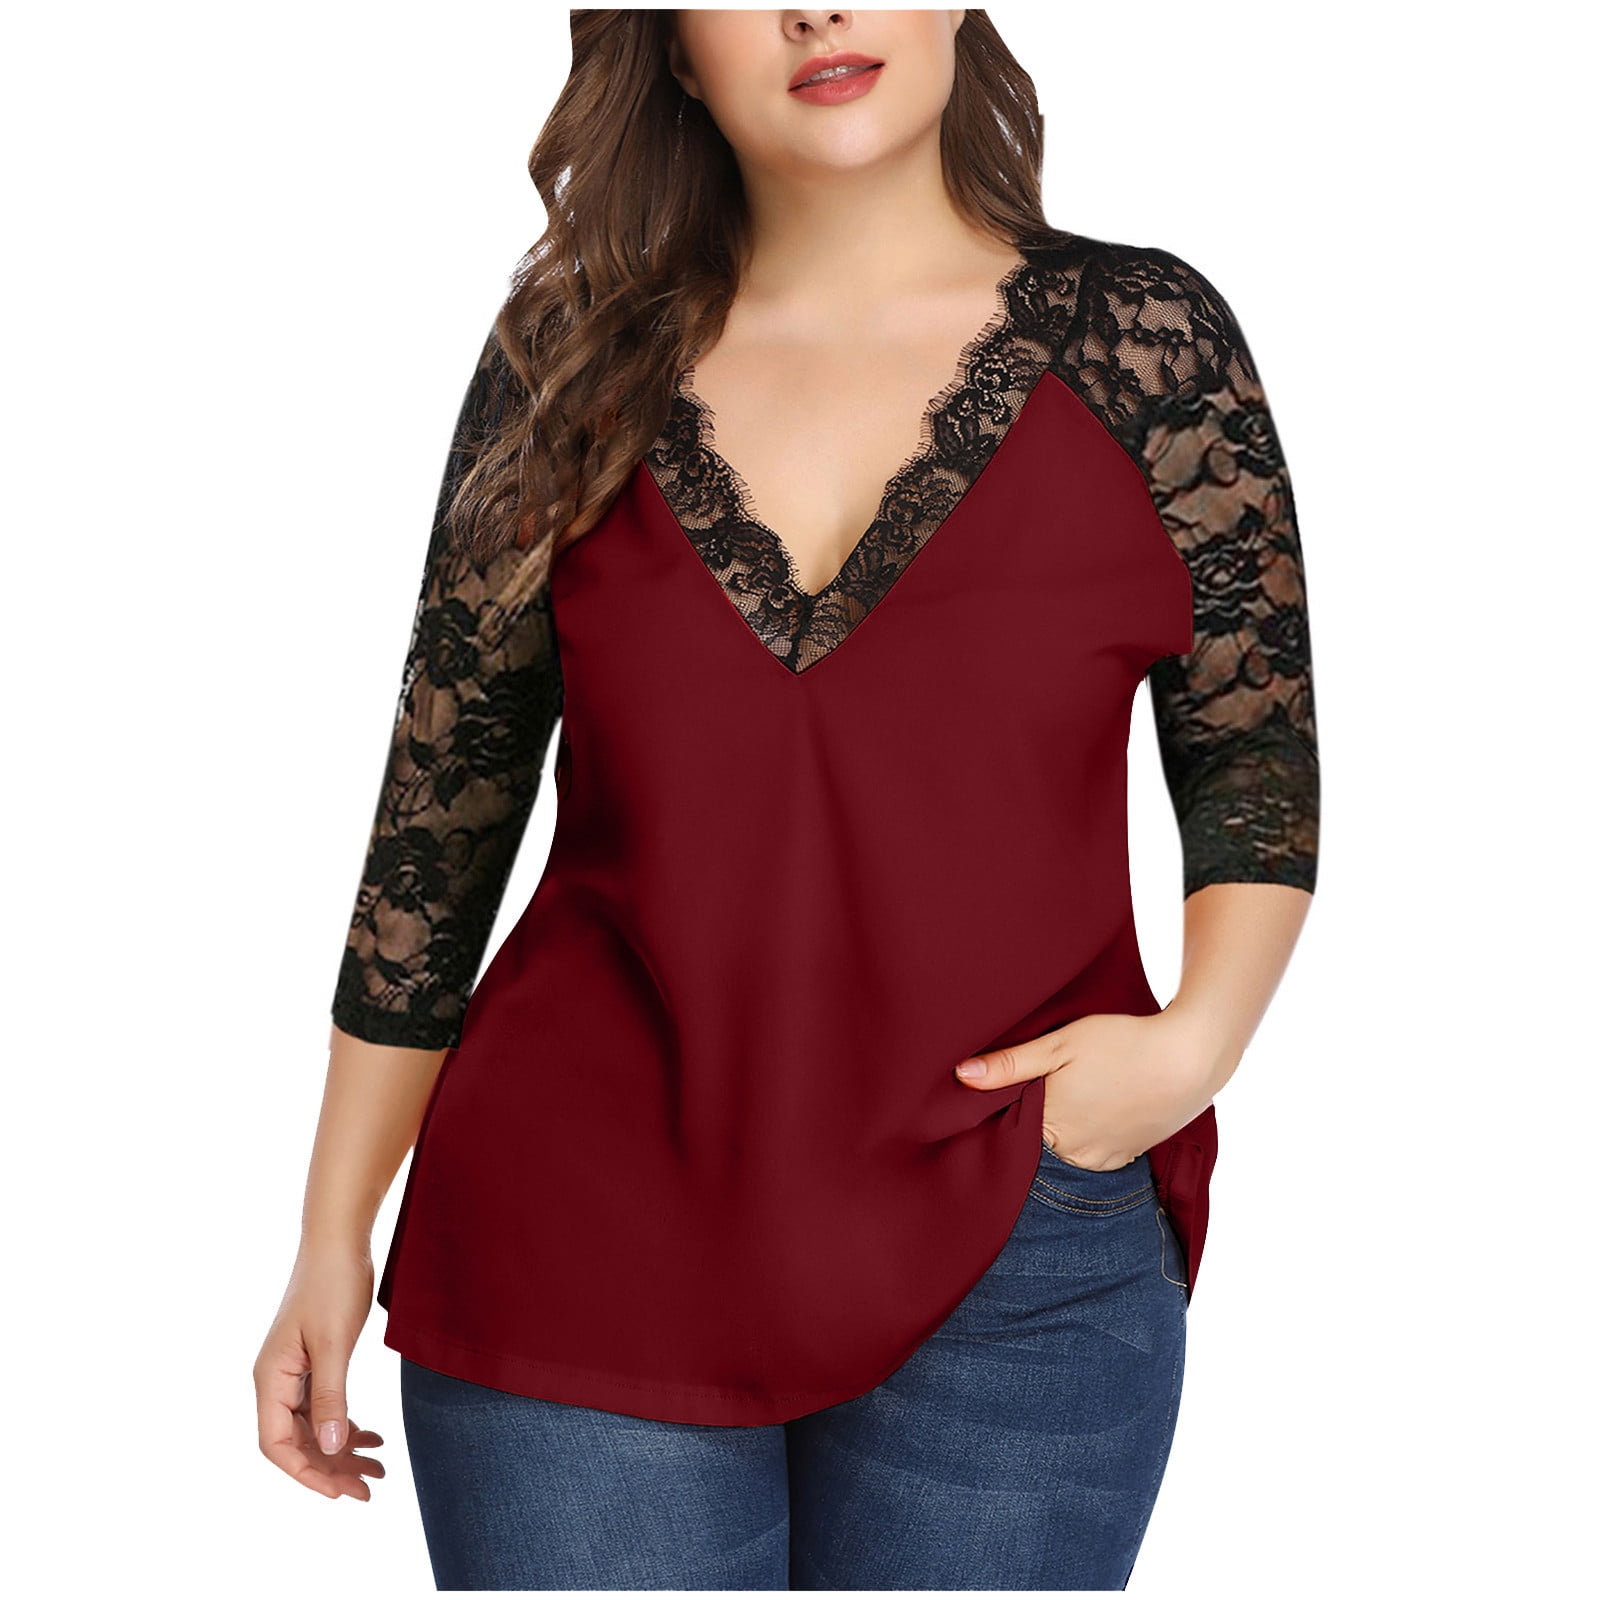 OKBOP Work Tops for Women,Plus Size Casual Long Sleeve Solid Lace